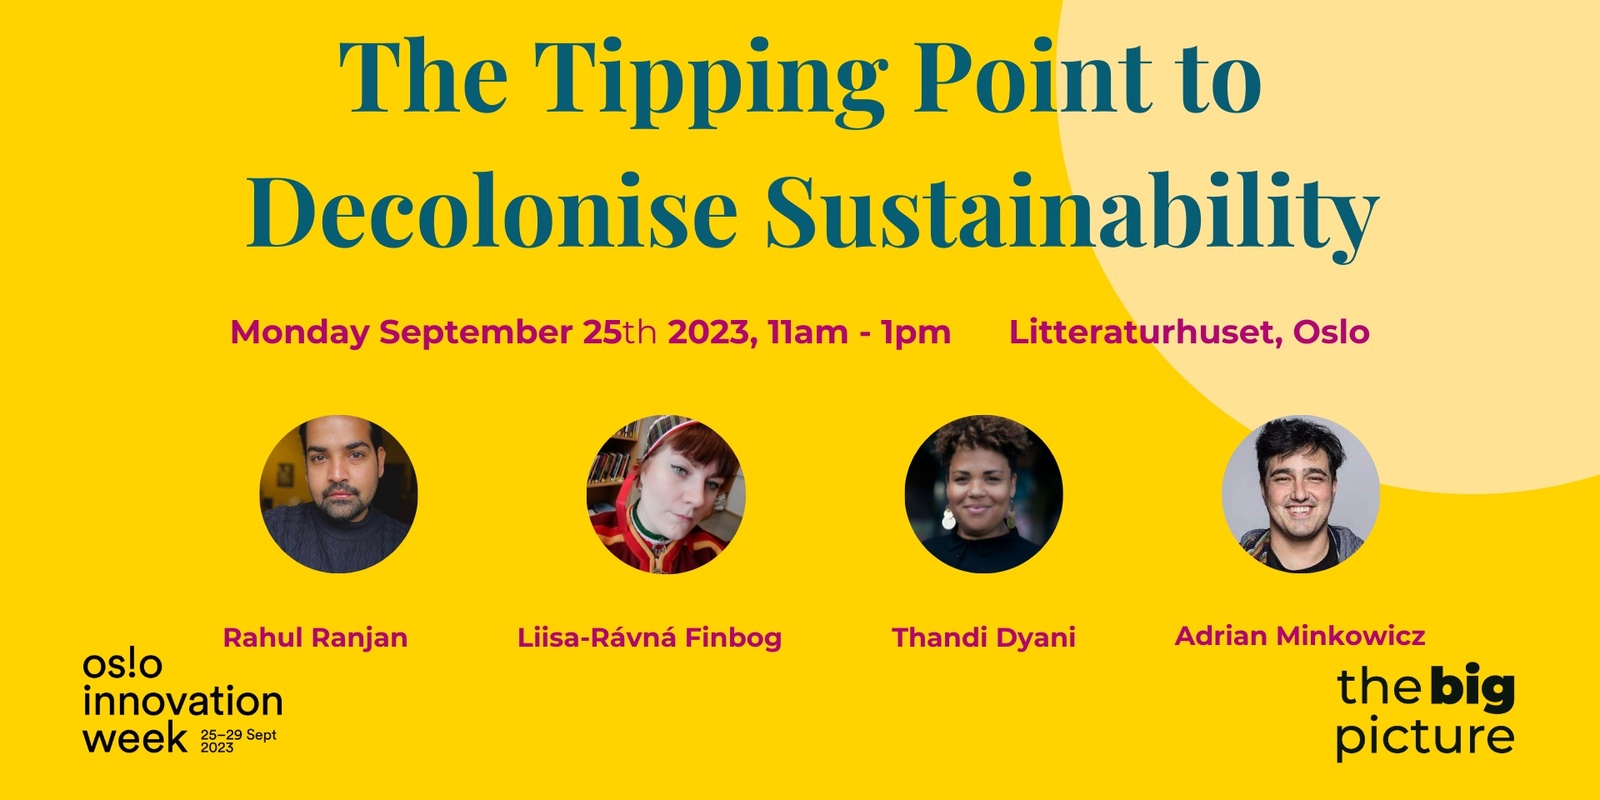 Banner image for The Tipping Point to Decolonise Sustainability